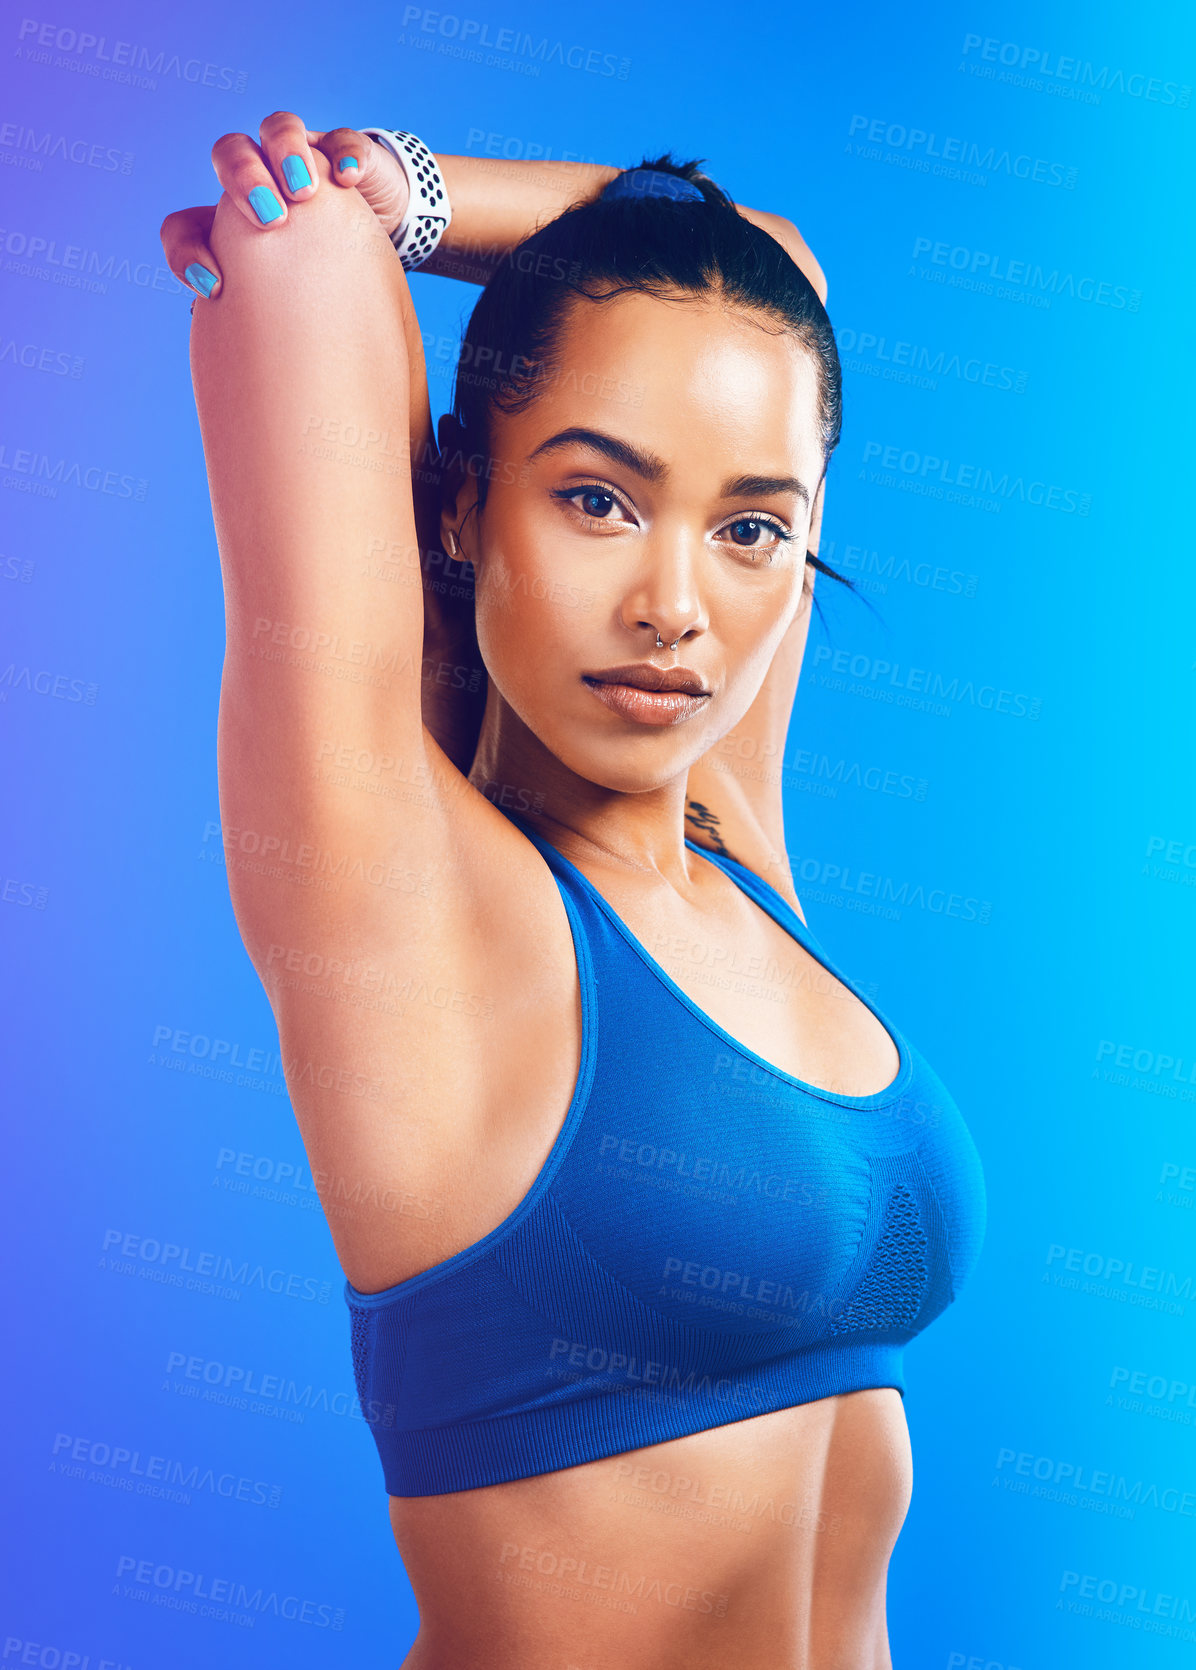 Buy stock photo Studio portrait of an attractive young sportswoman stretching her arms against a blue background